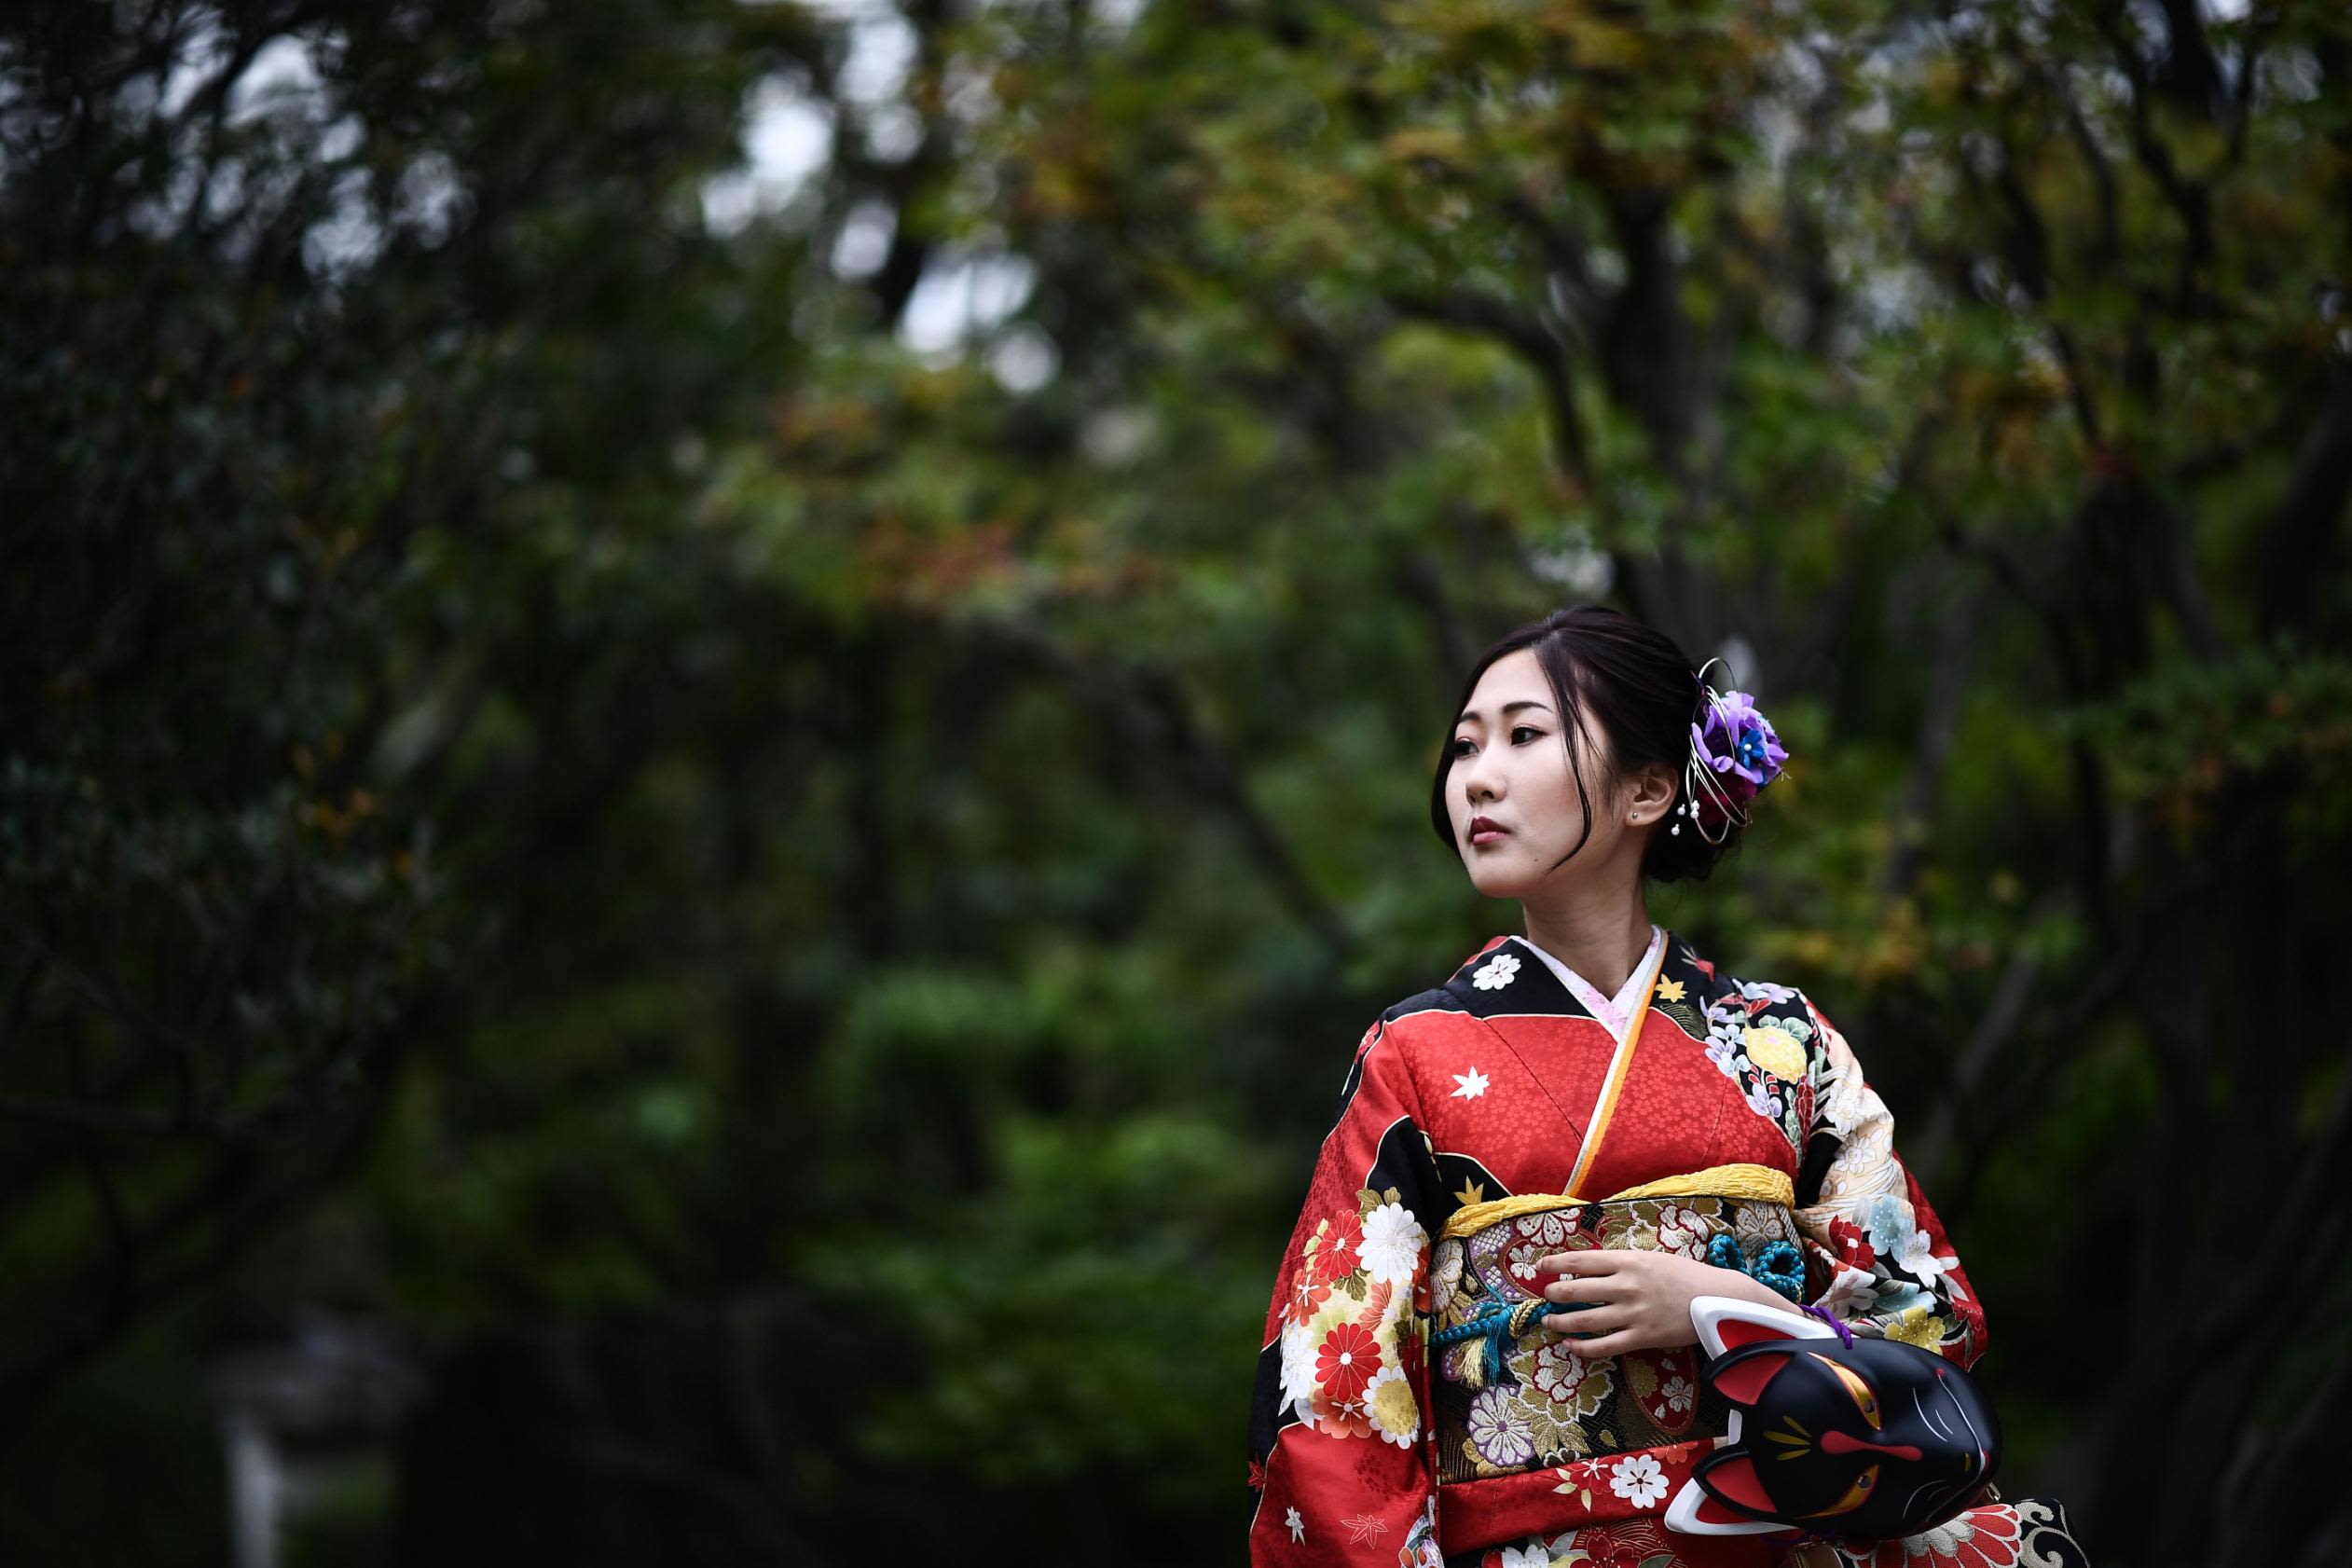 Pandemic threatens to unravel artist's kimono ambitions - The